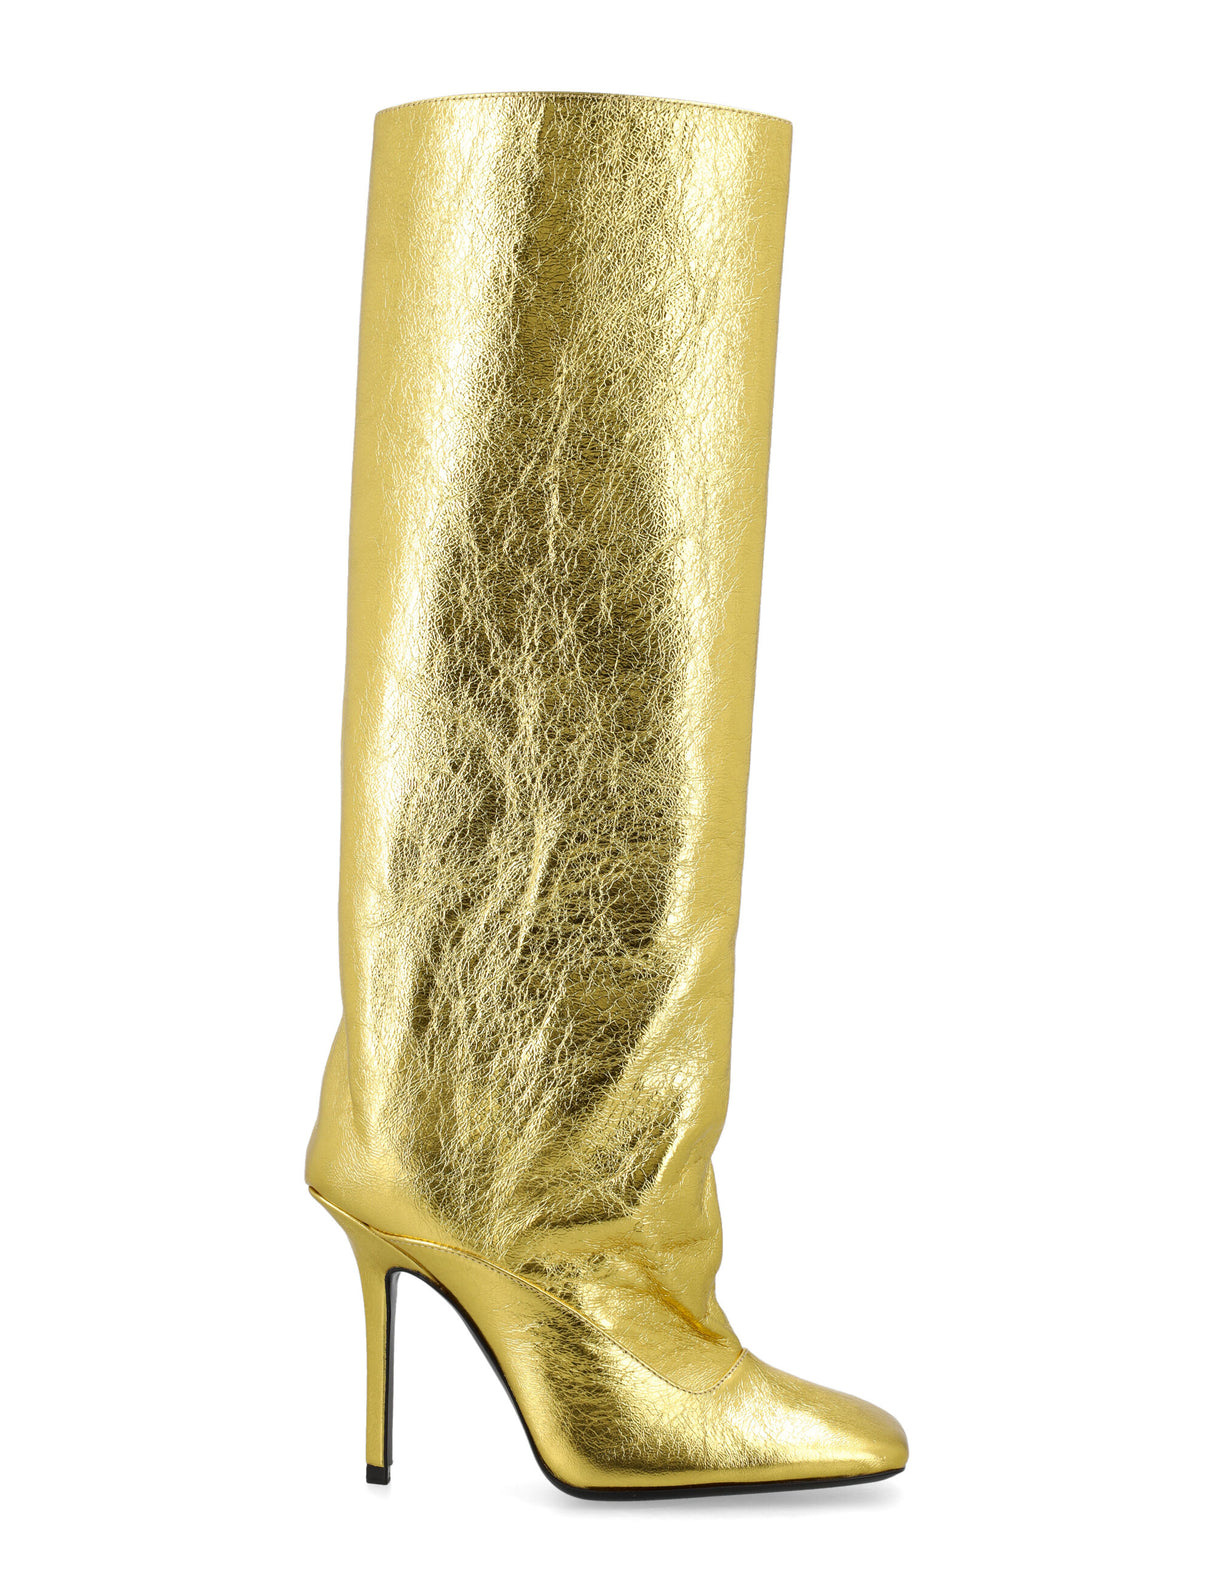 THE ATTICO Glam up your look with these stunning gold knee-high boots